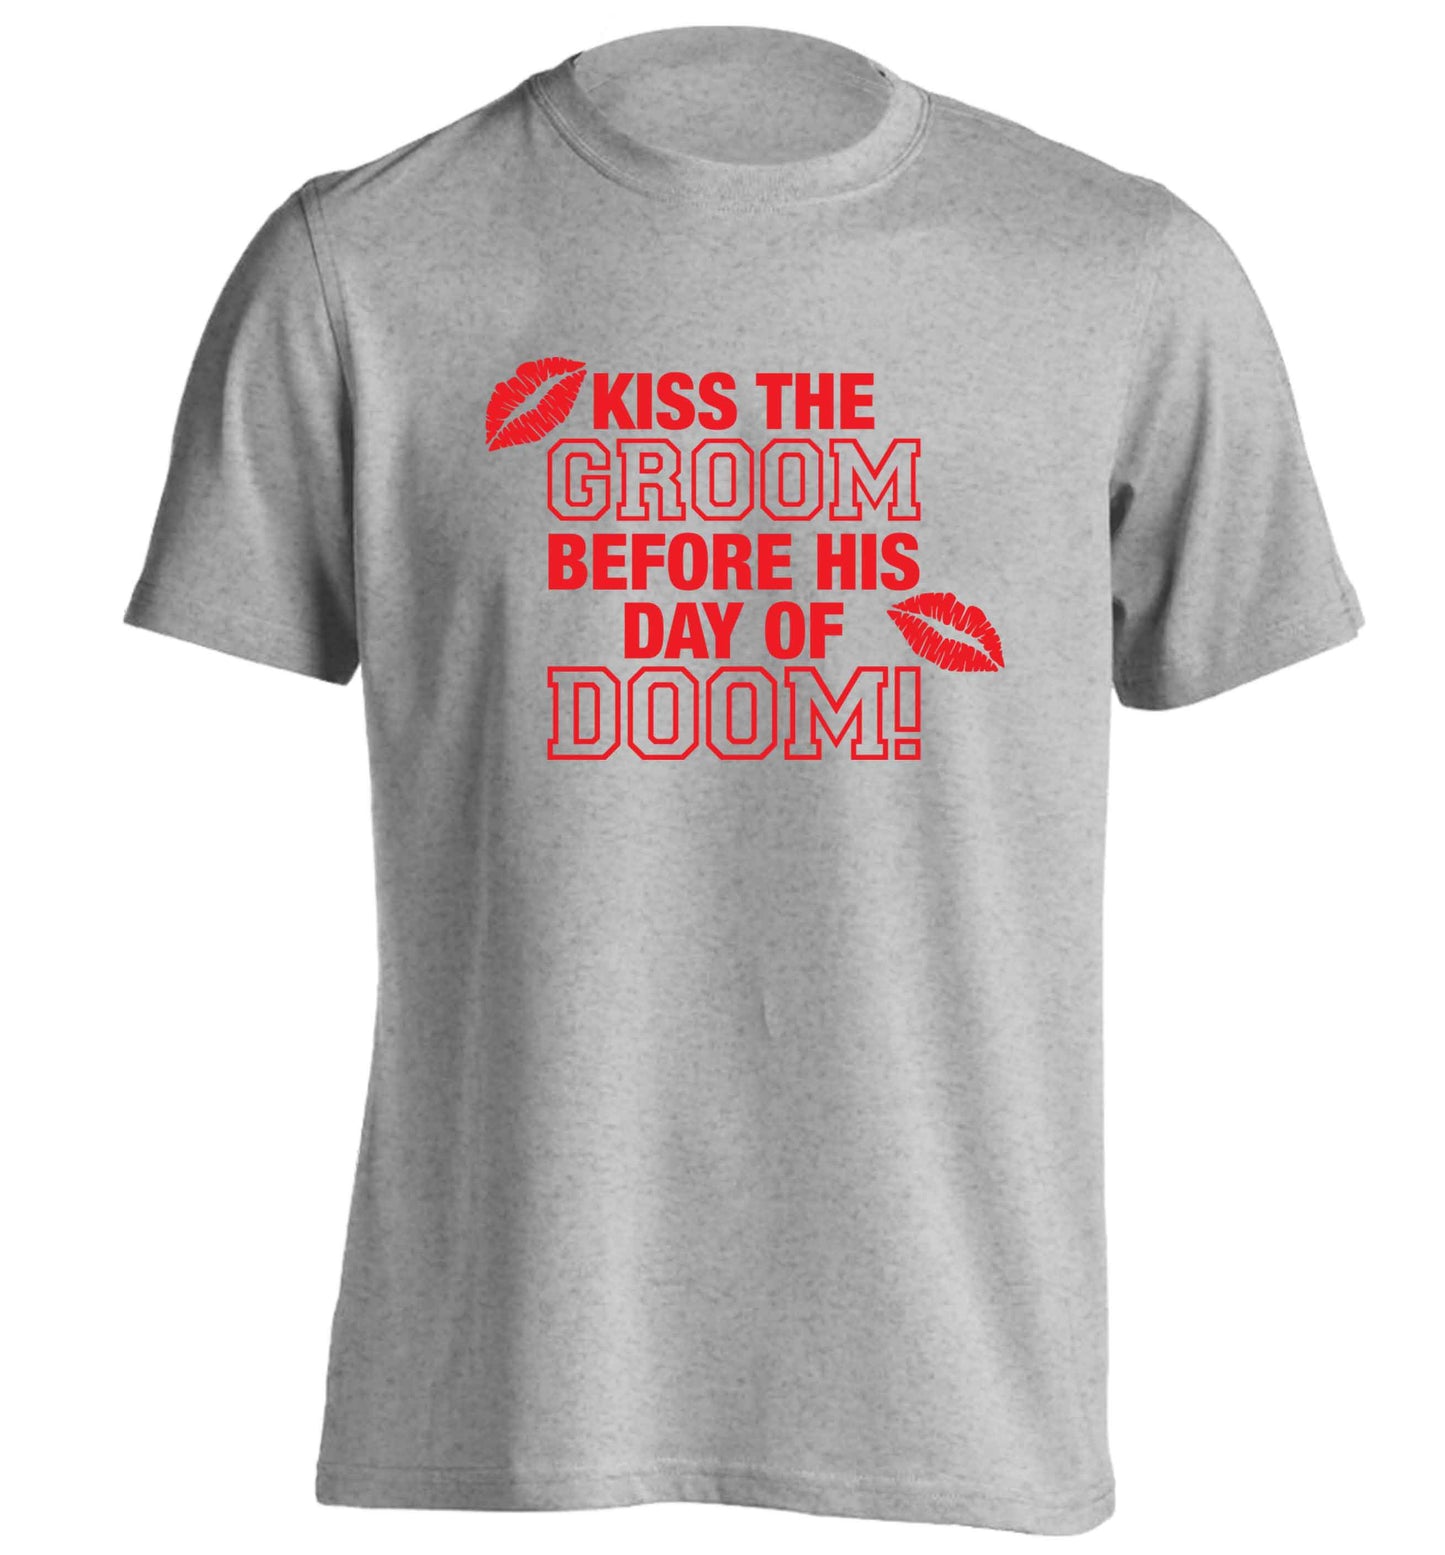 Kiss the groom before his day of doom! adults unisex grey Tshirt 2XL